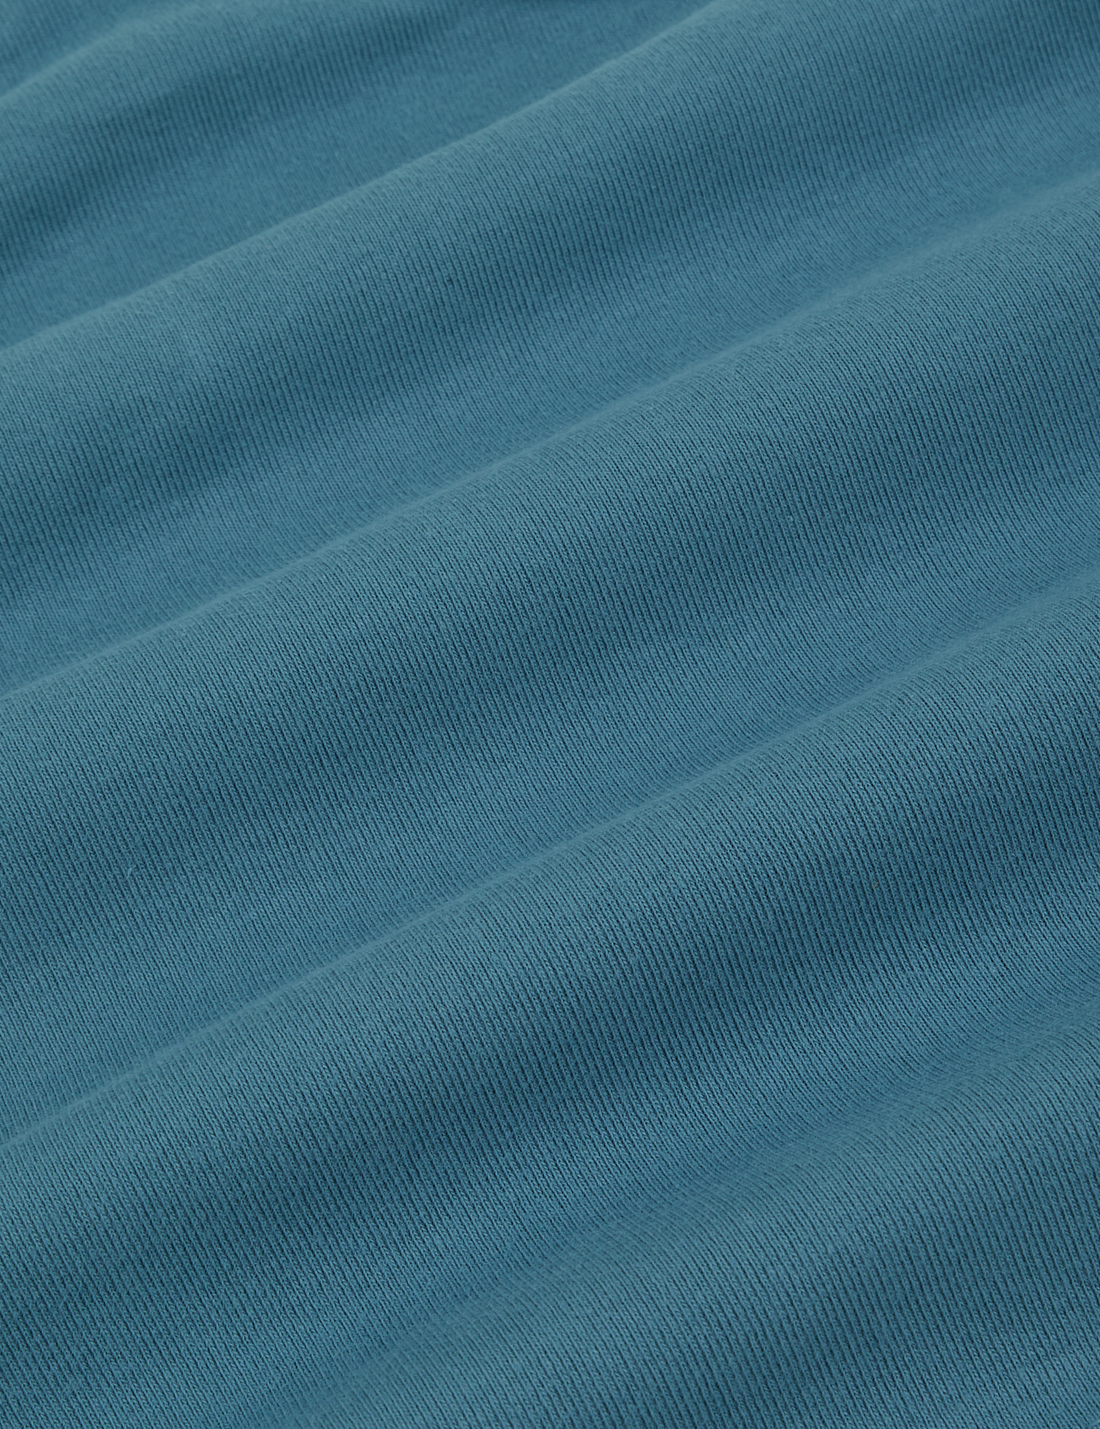 Halter Top in Marine Blue fabric detail close up